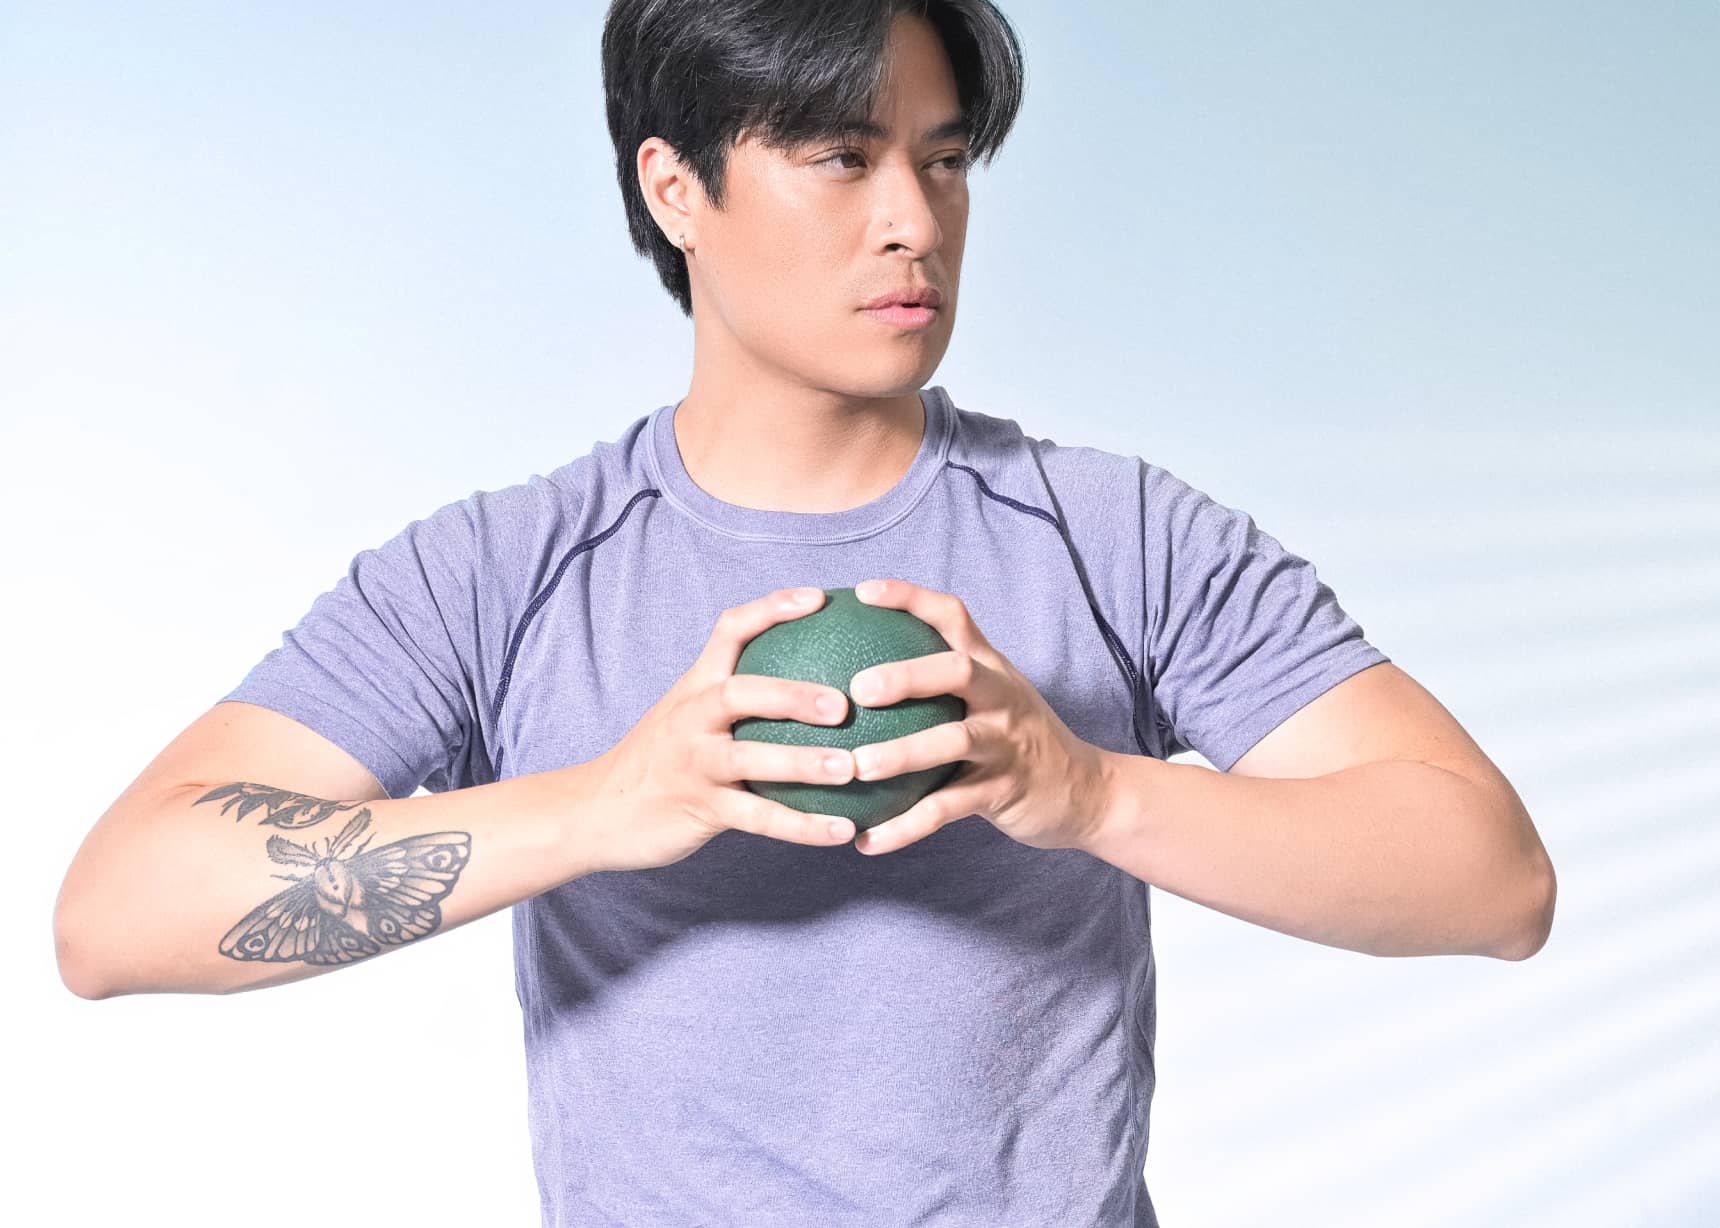 Man gripping green inflatable small exercise ball.